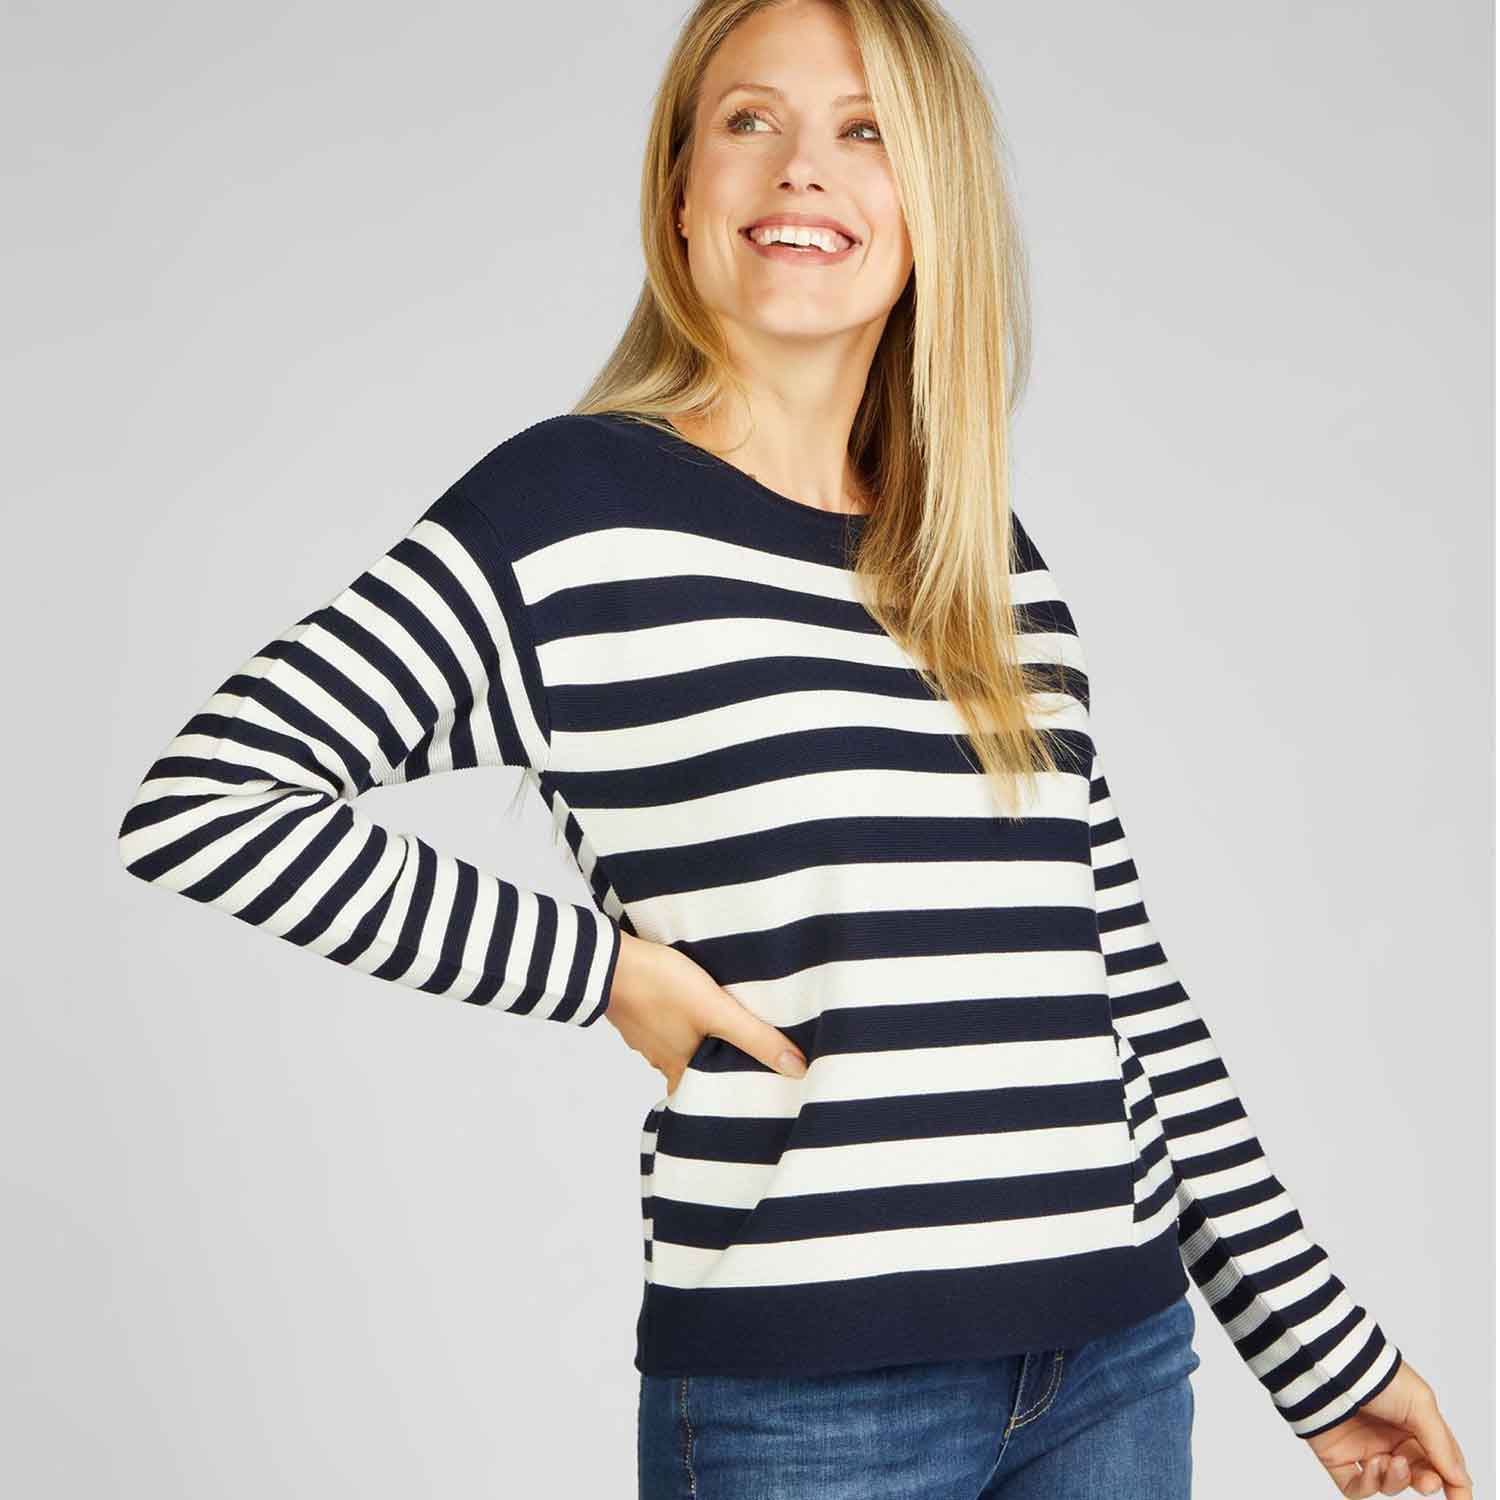 RABE Striped Jumper in – Obsessions 51-213612 – Marine